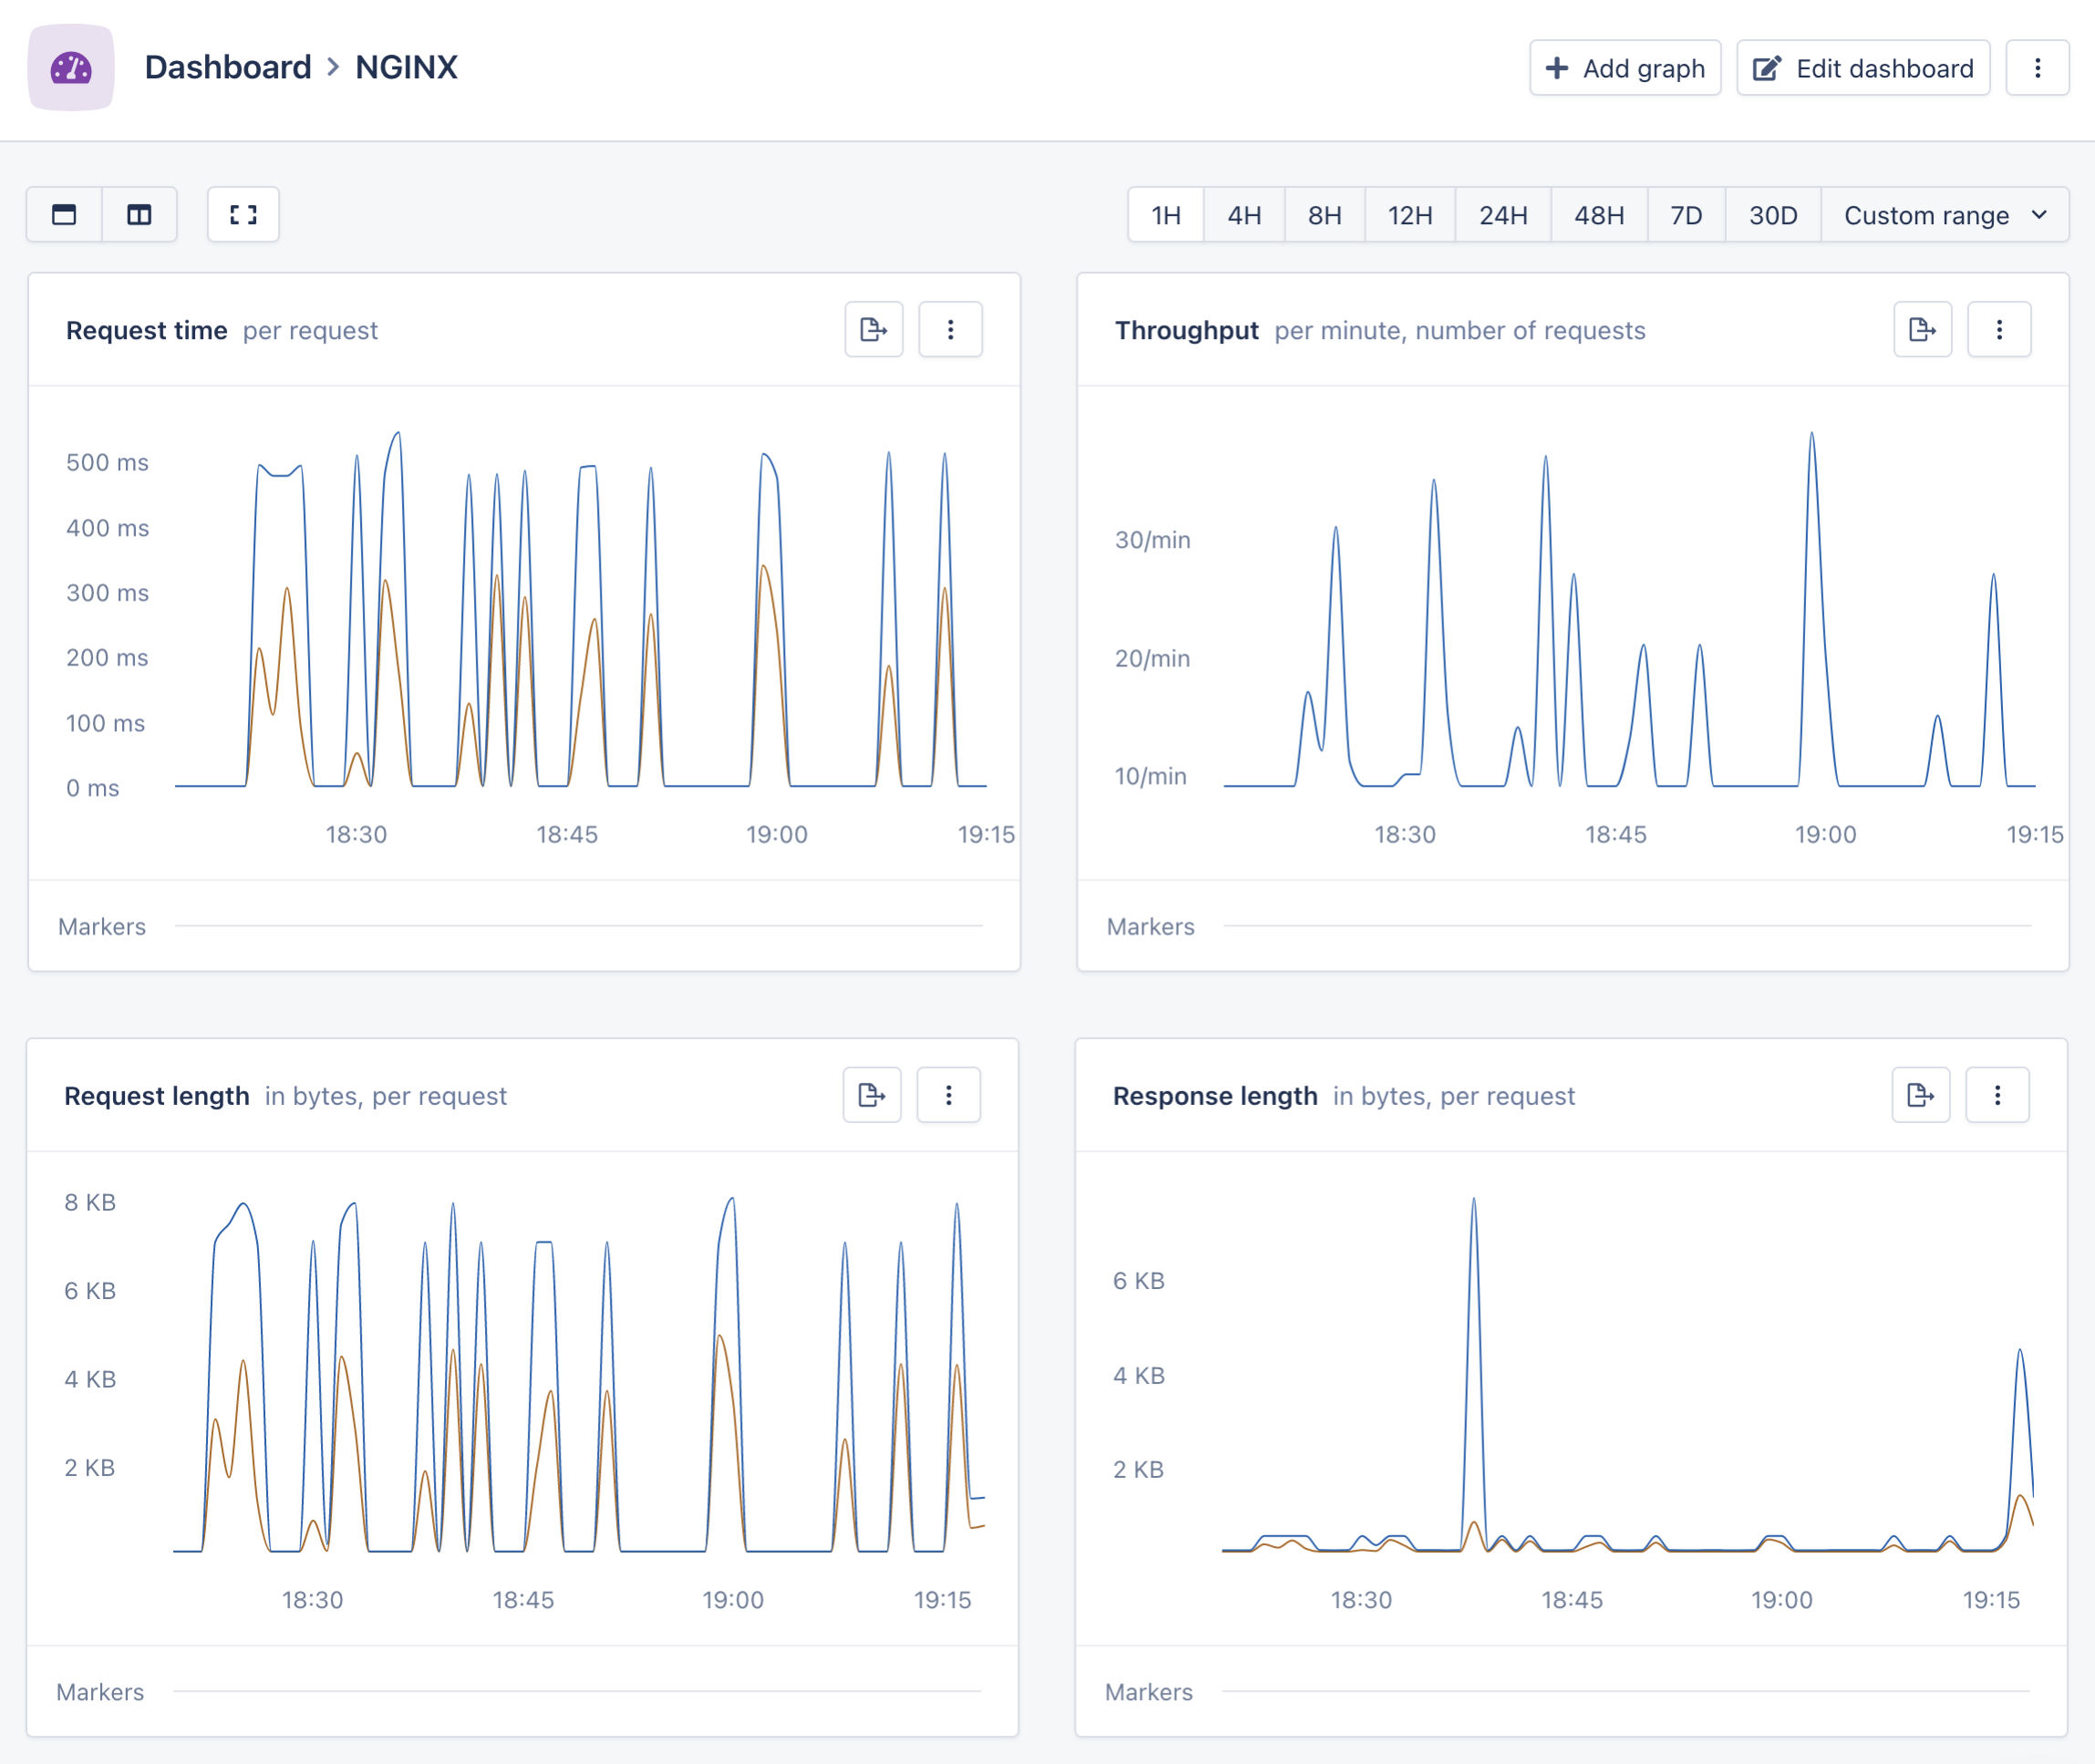 The NGINX automated dashboard